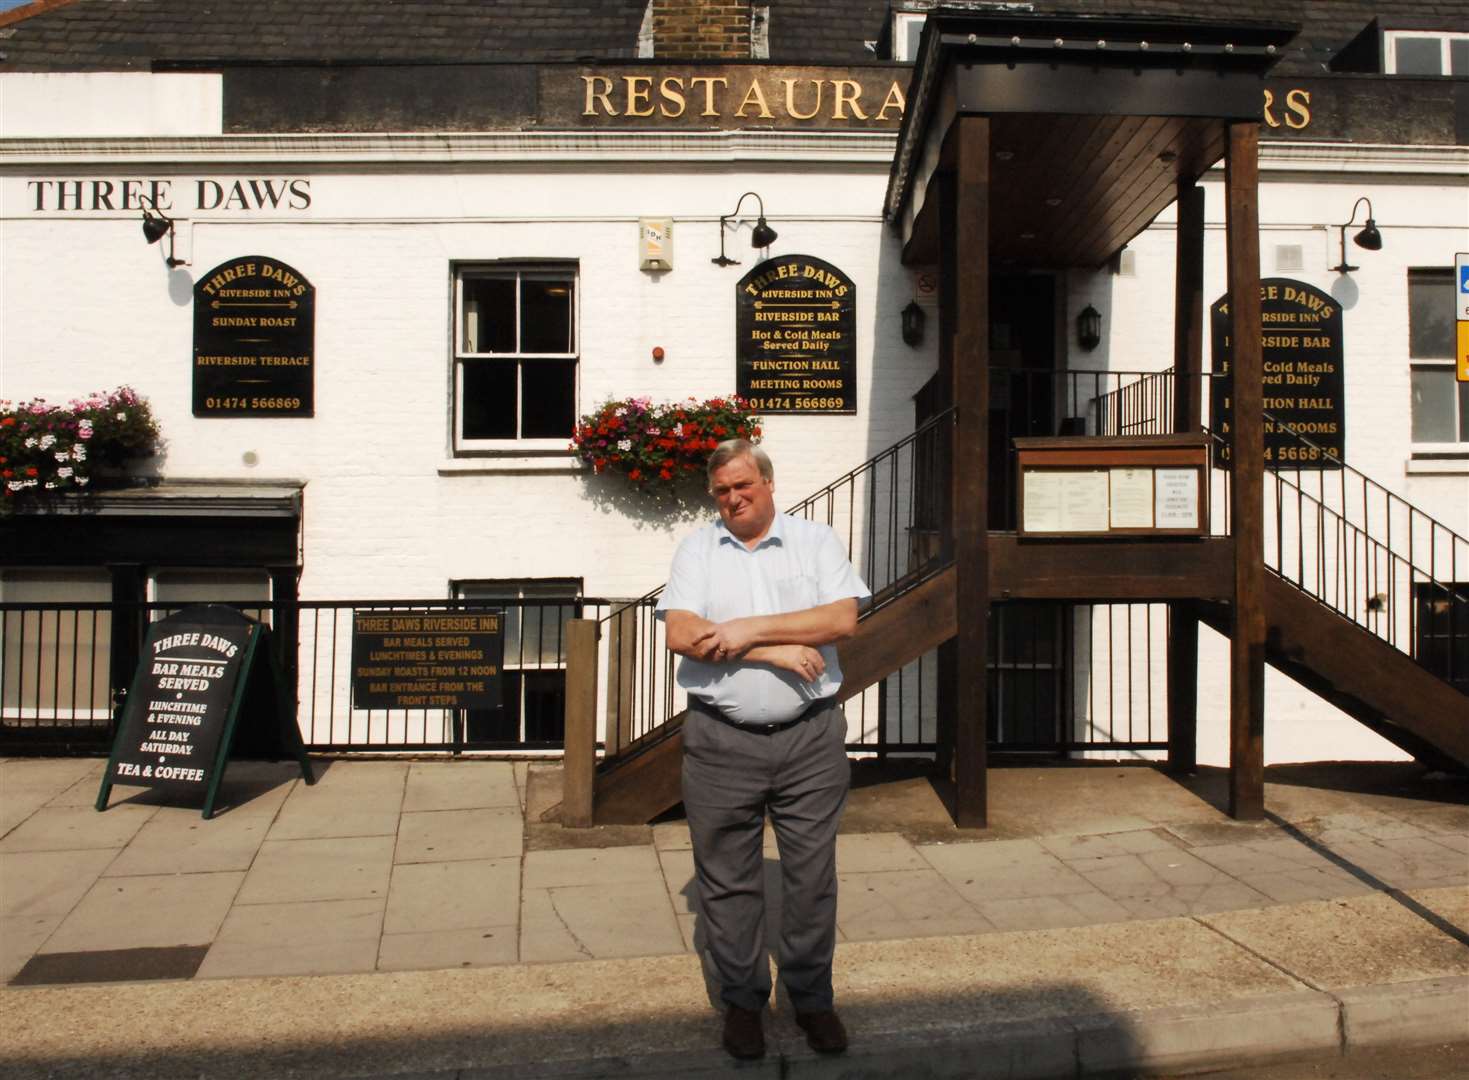 Lester Banks of the Three Daws says the closures will harm the pub at one of its strongest times of the year. Picture: Nick Johnson